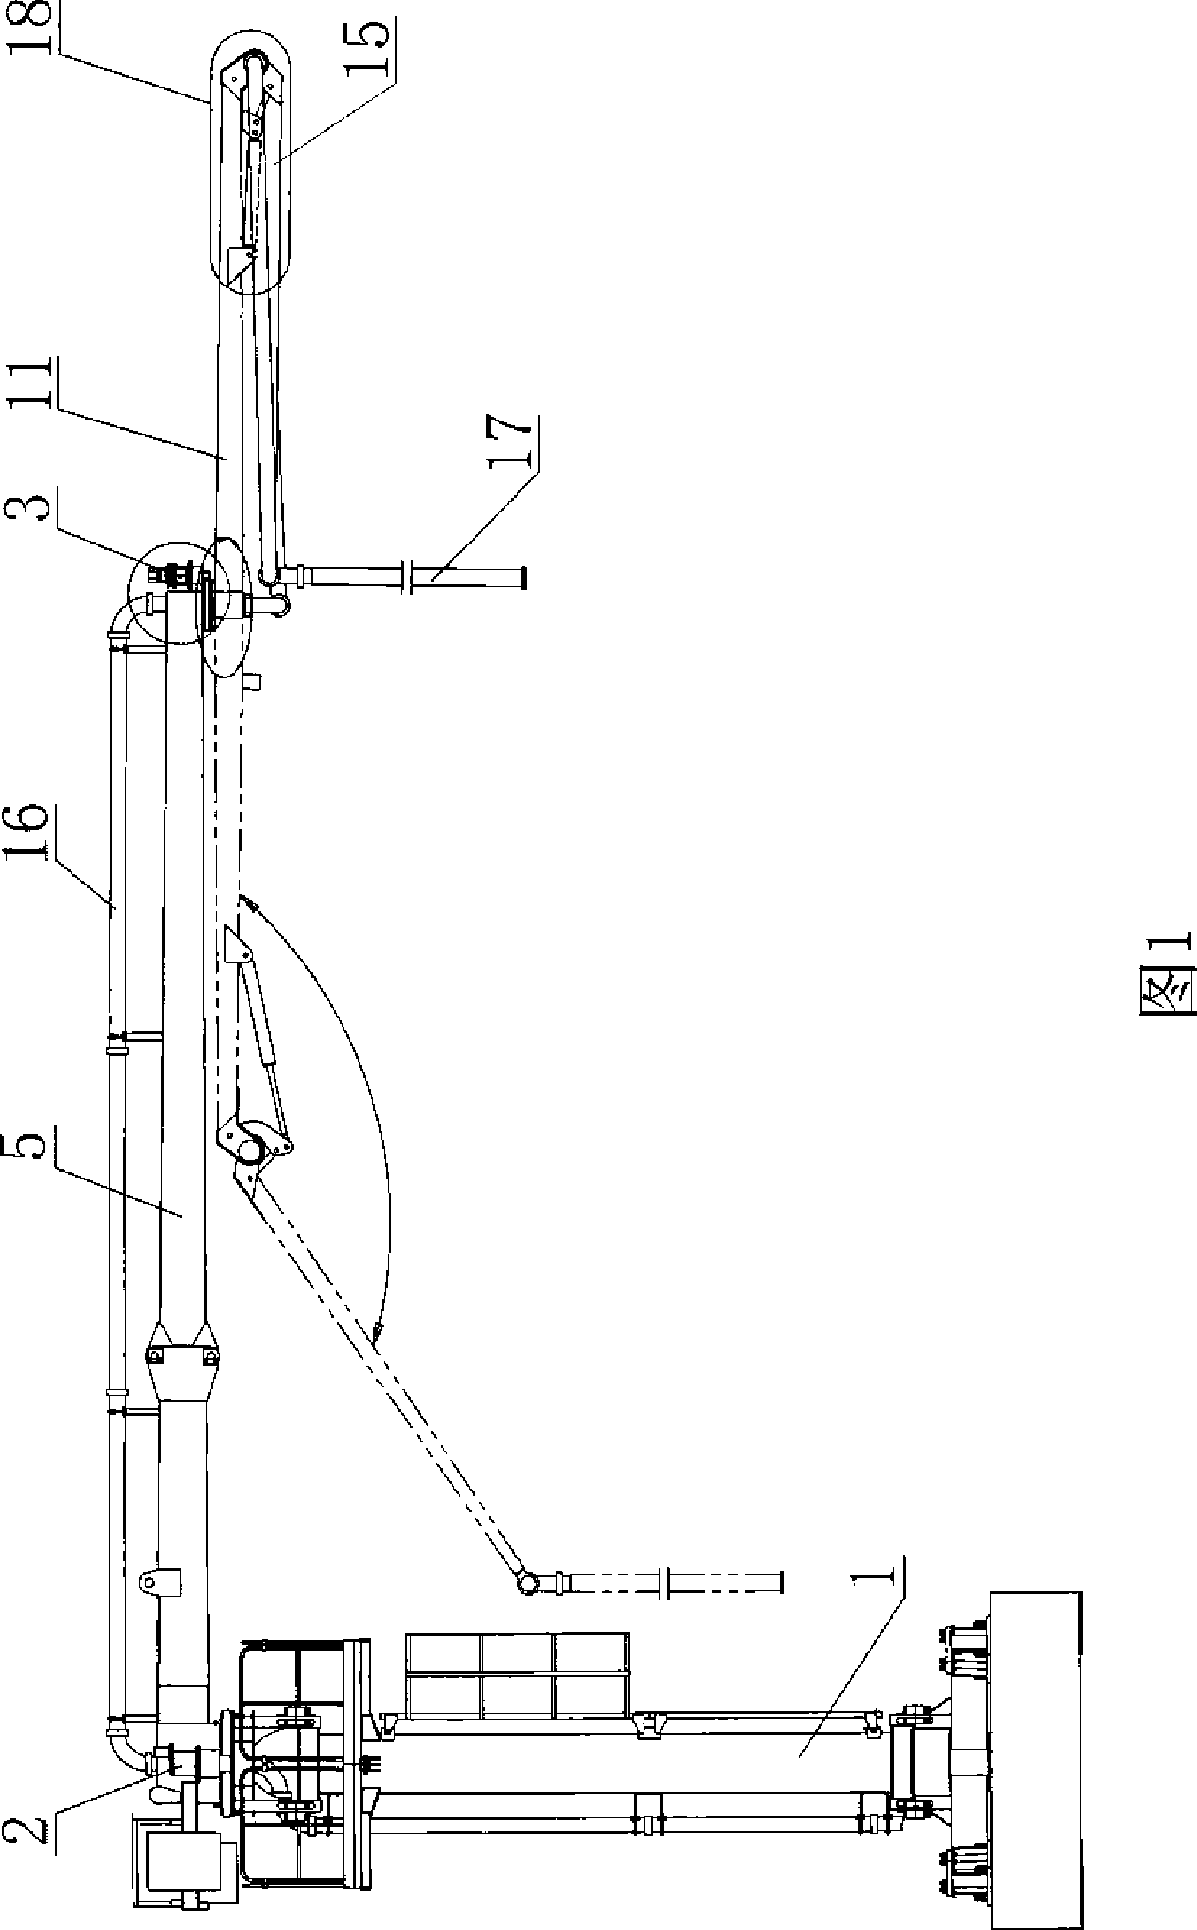 Concrete distributor with arm support capable of both horizontal rotation and pitching movement